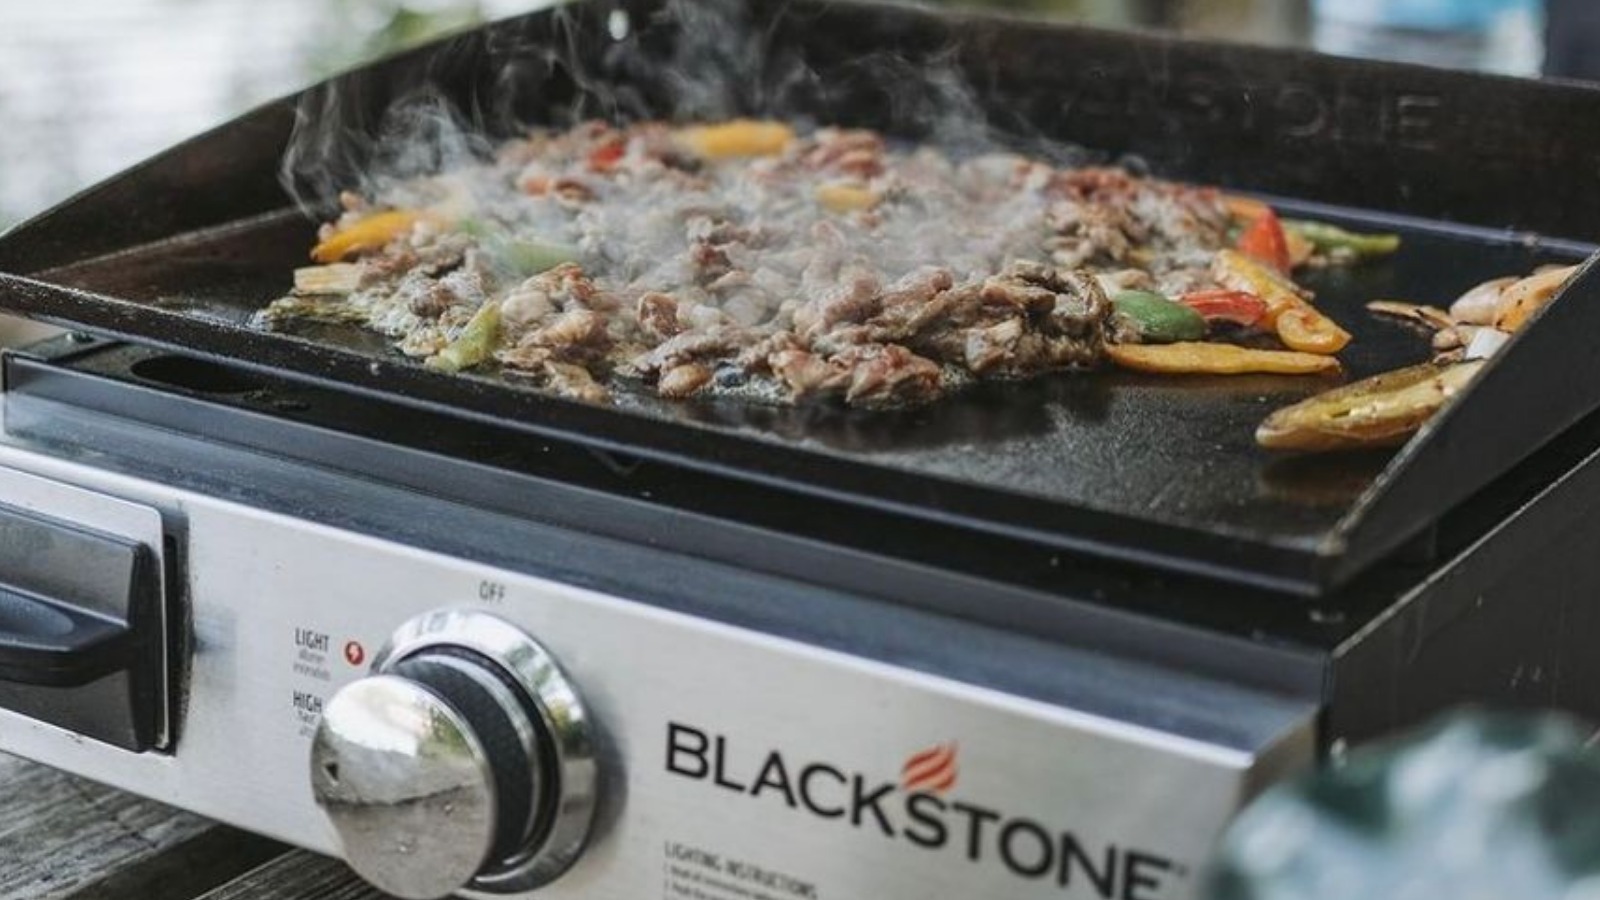 https://www.foodrepublic.com/img/gallery/how-to-clean-a-blackstone-griddle-and-how-often-you-should-do-it/l-intro-1696608244.jpg